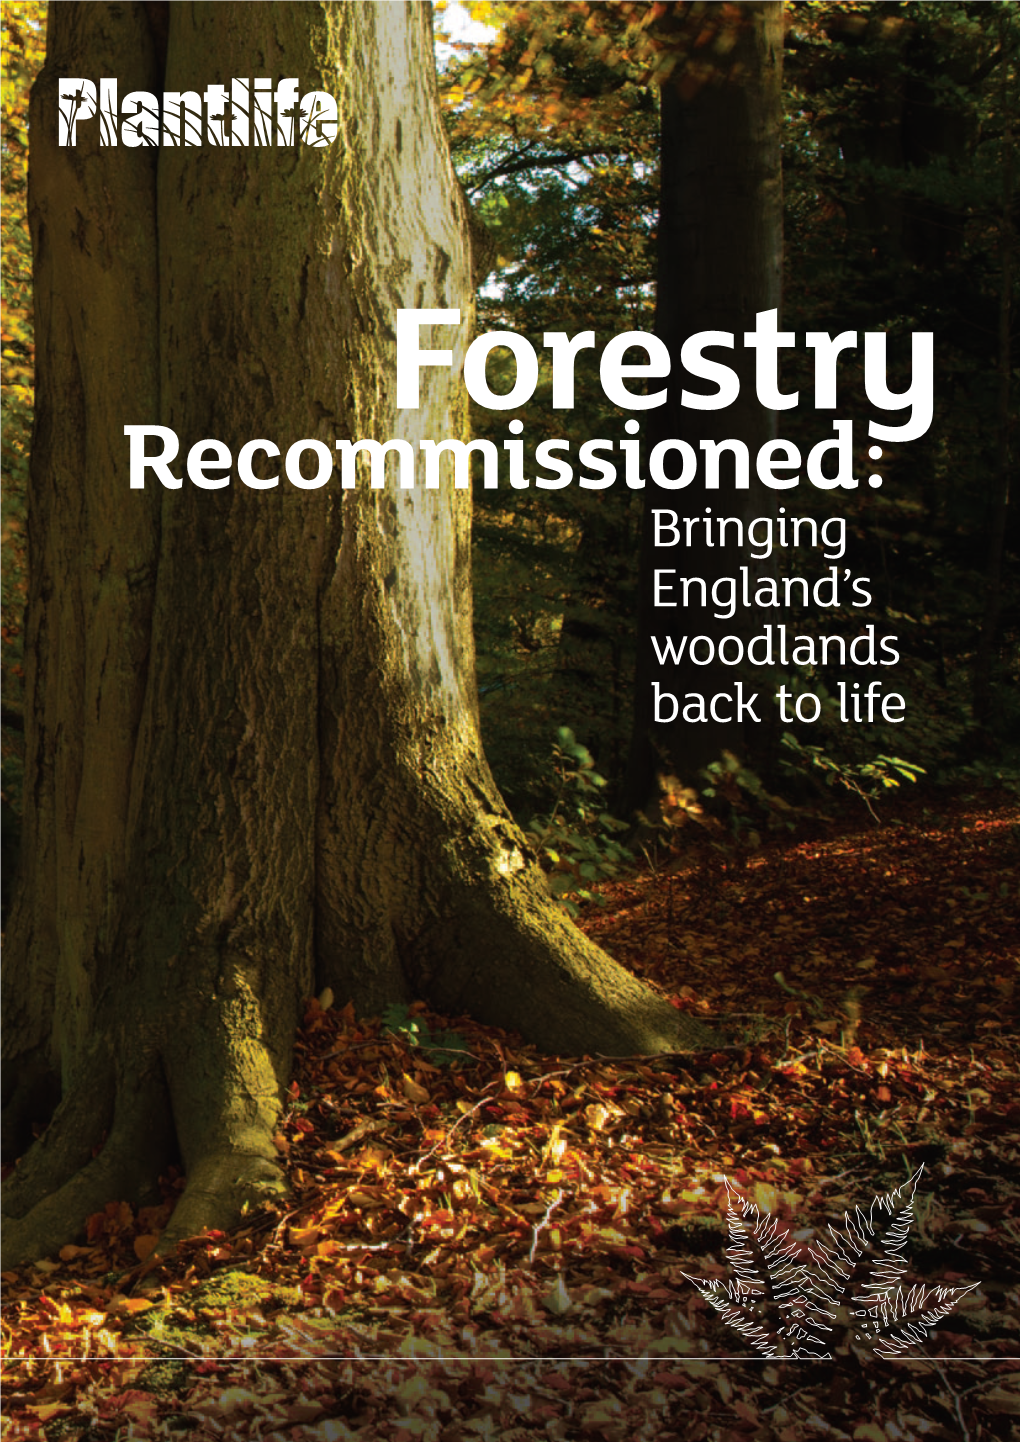 Forestry Recommissioned: Bringing England's Woodlands Back to Life